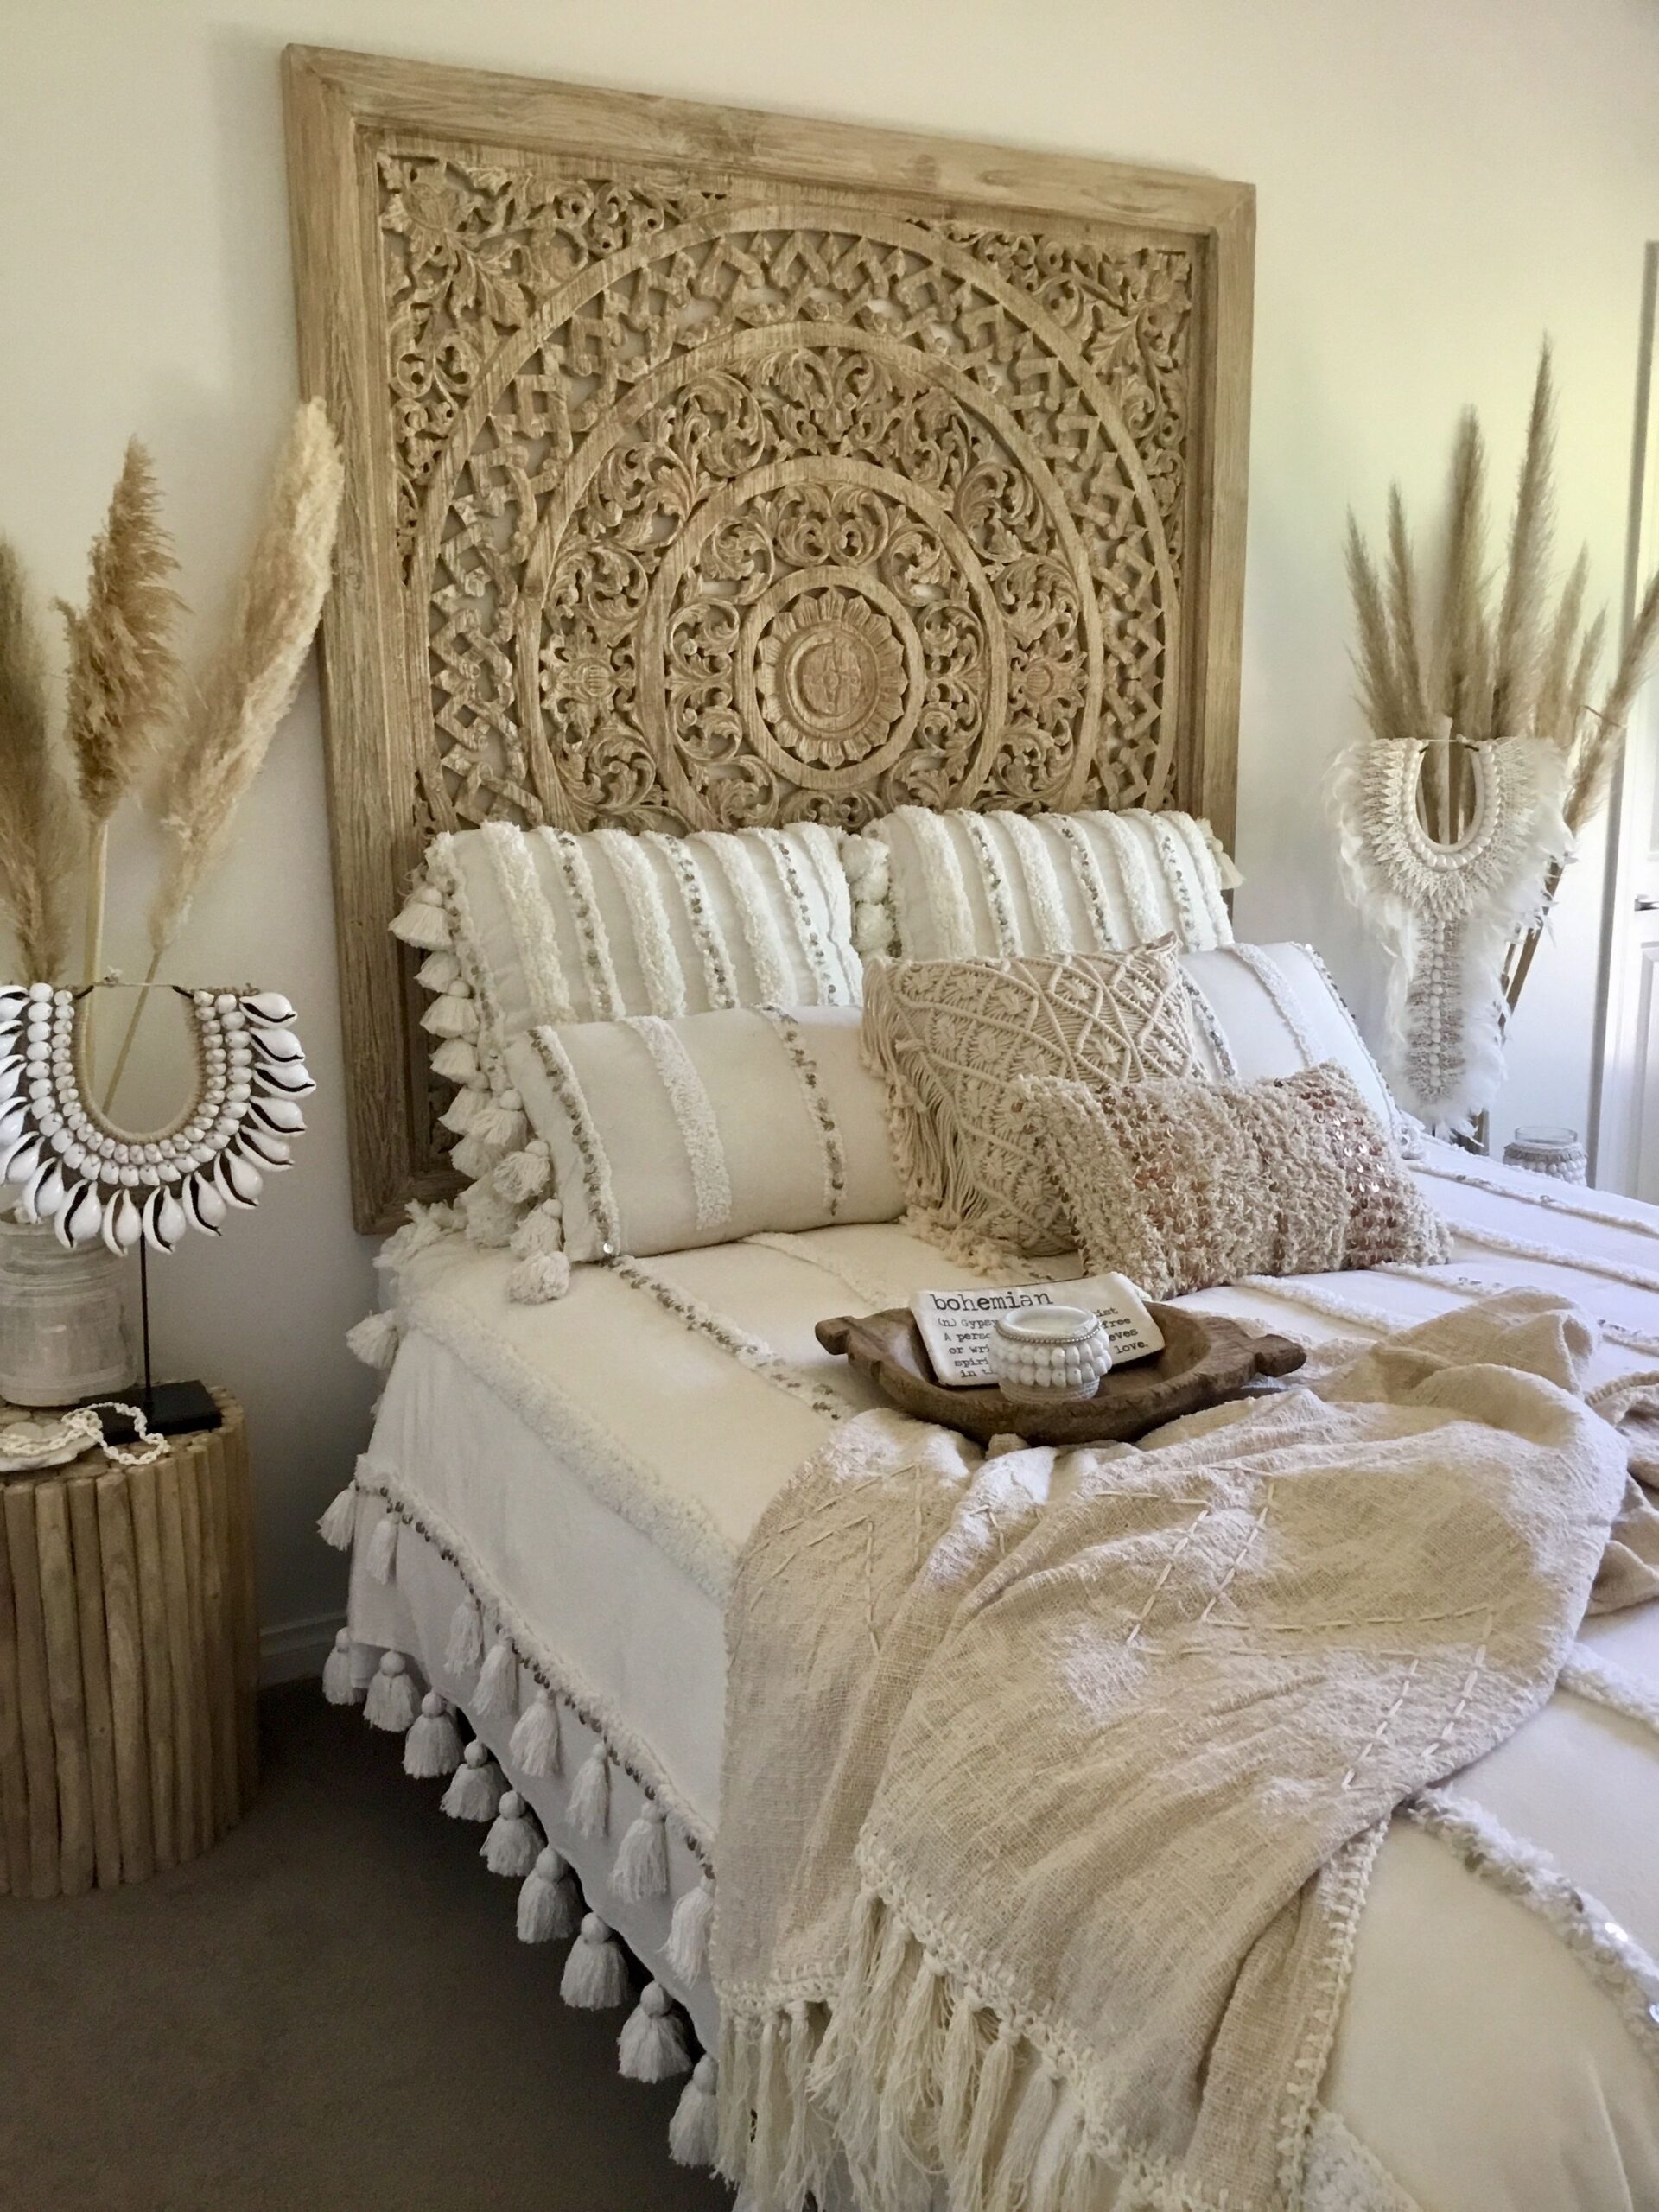 Transform Your Bedroom into a Boho Oasis A Guide to Boho Bedroom Furniture